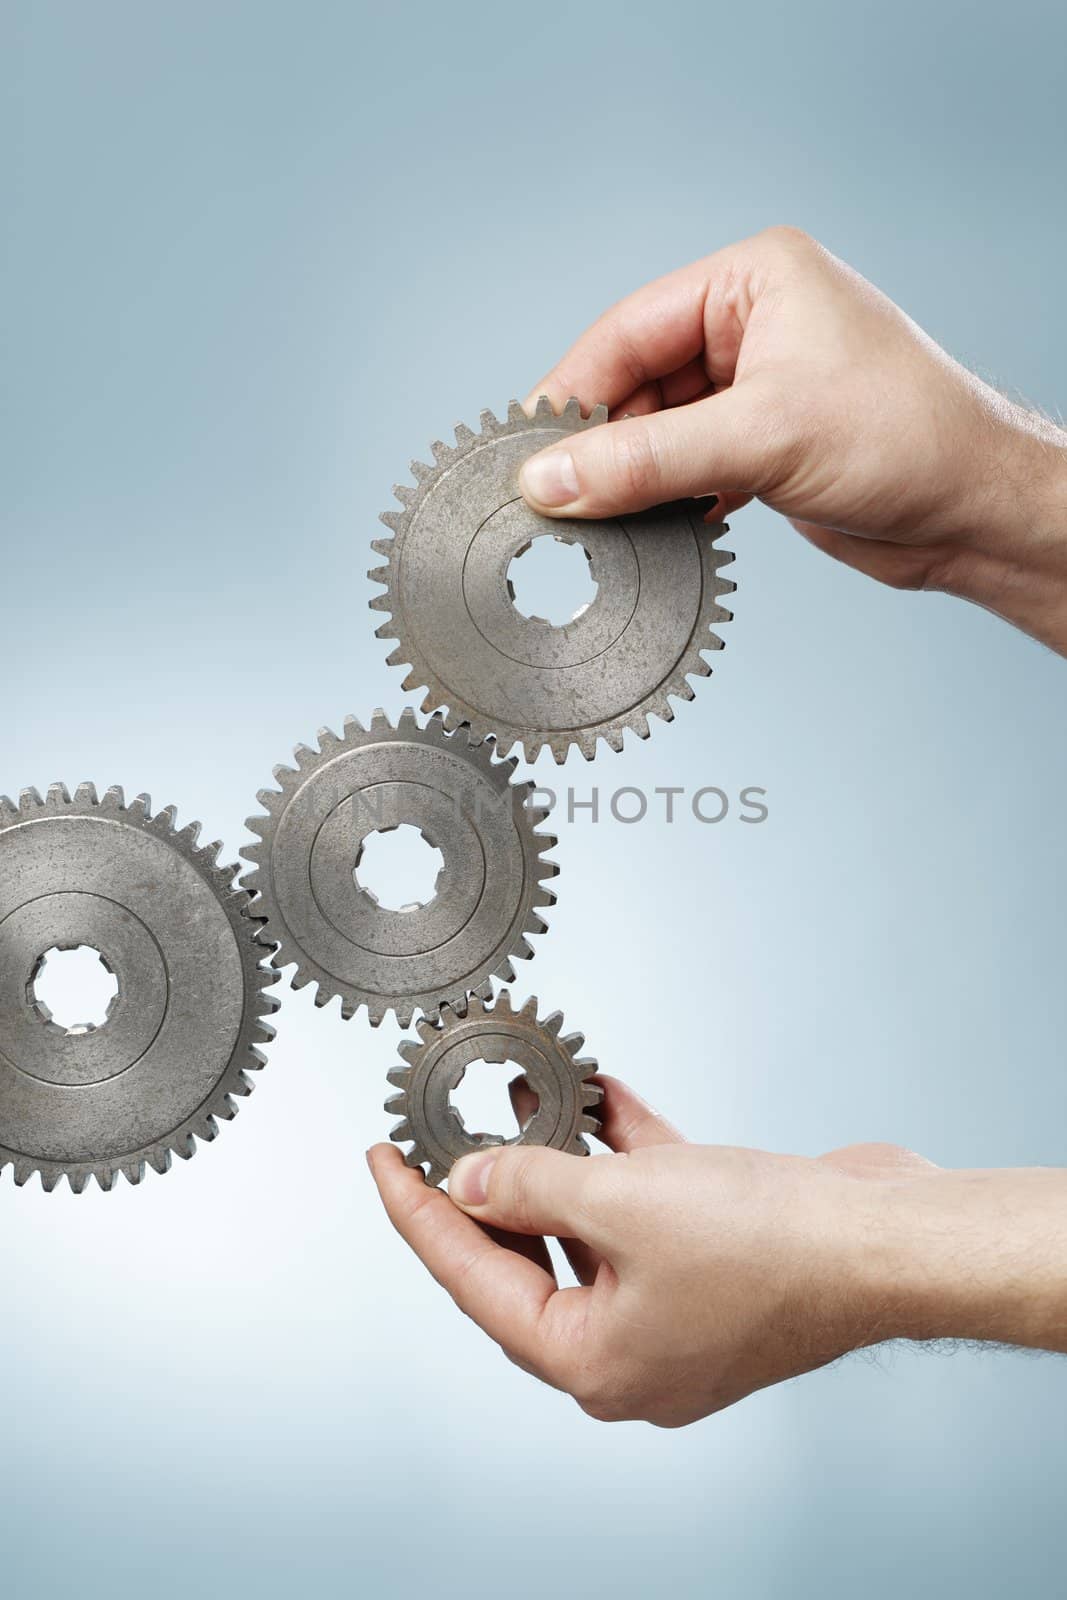 Man designing a mechanic system with old metallic cog gear wheels.